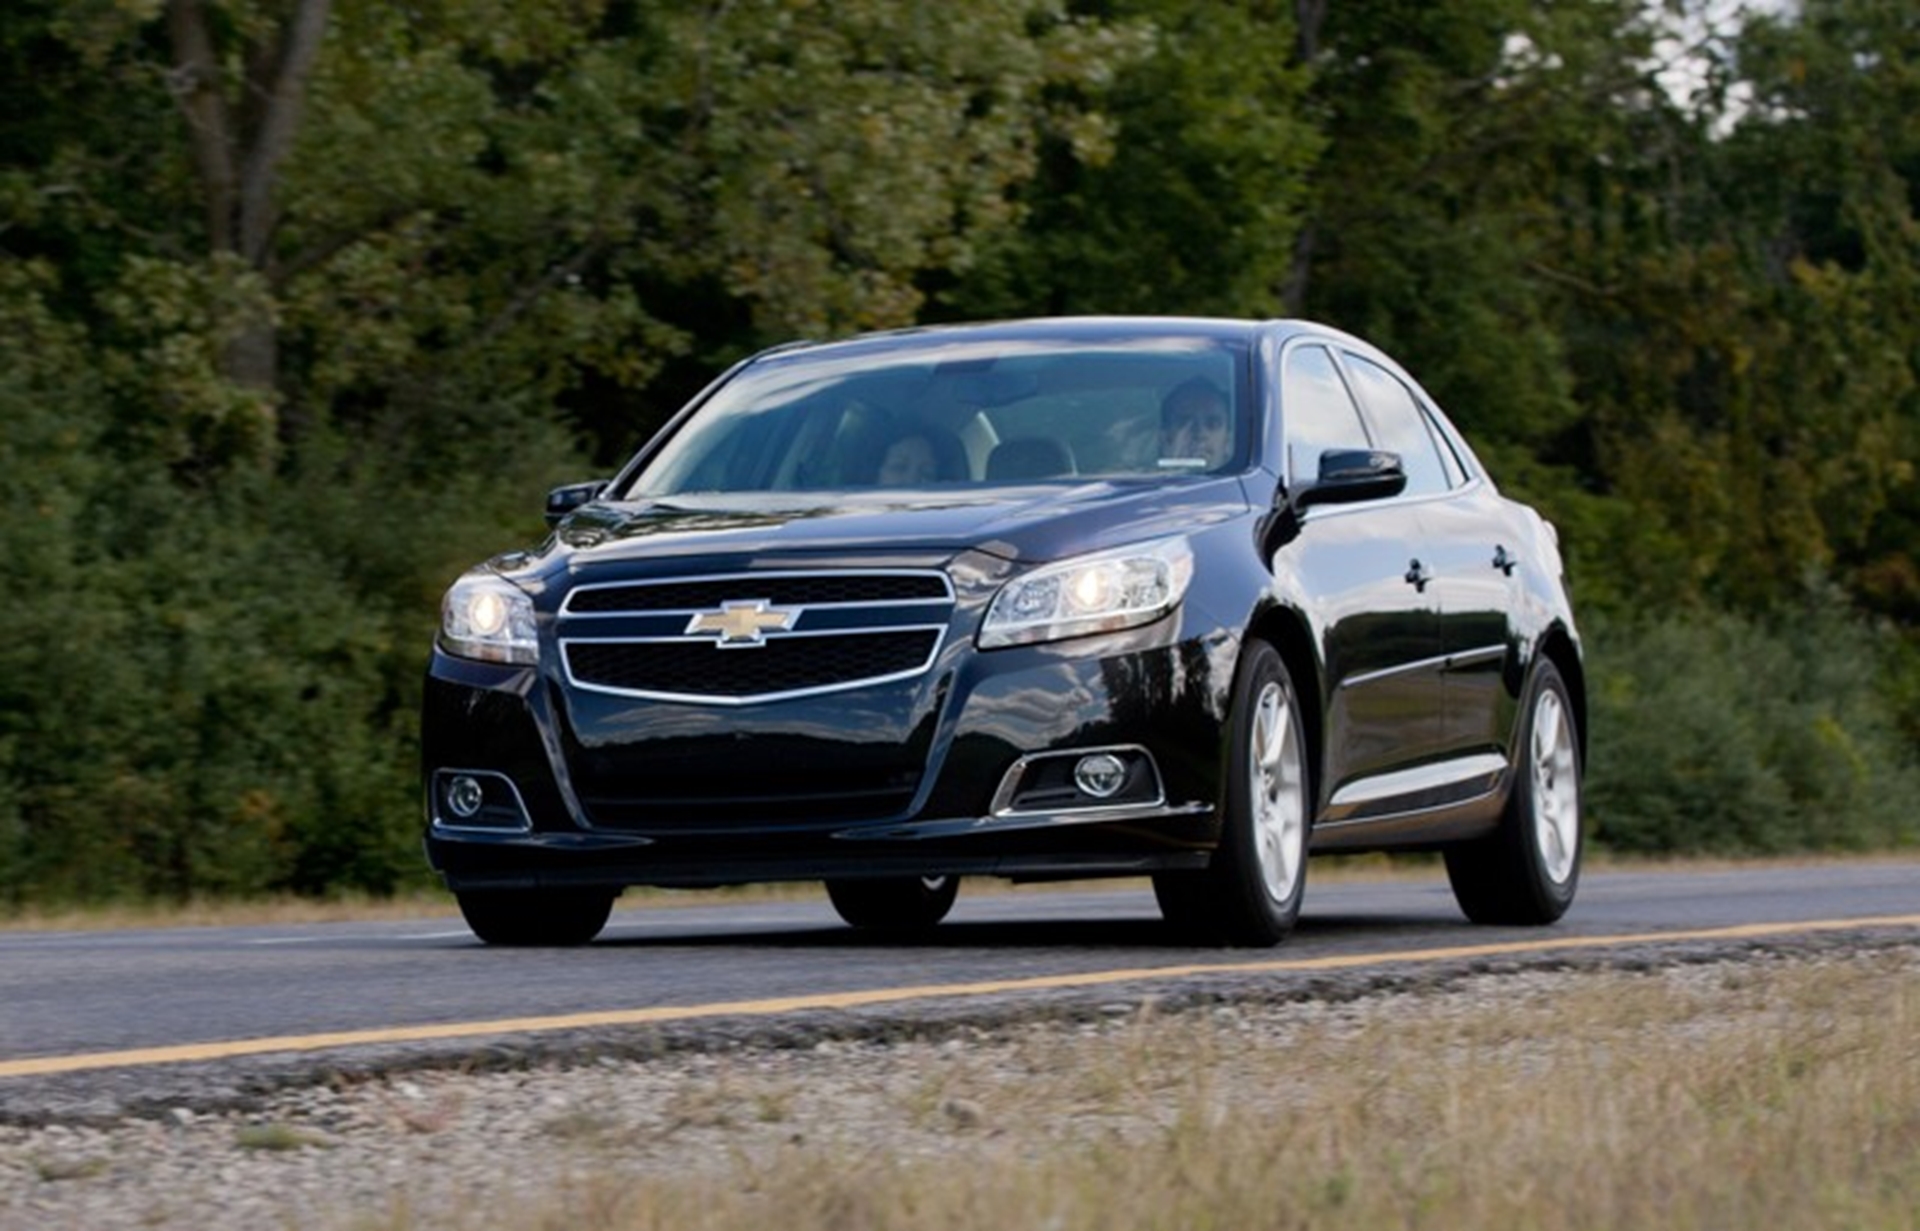 2013 Chevrolet Malibu Aims for World-Class Safety